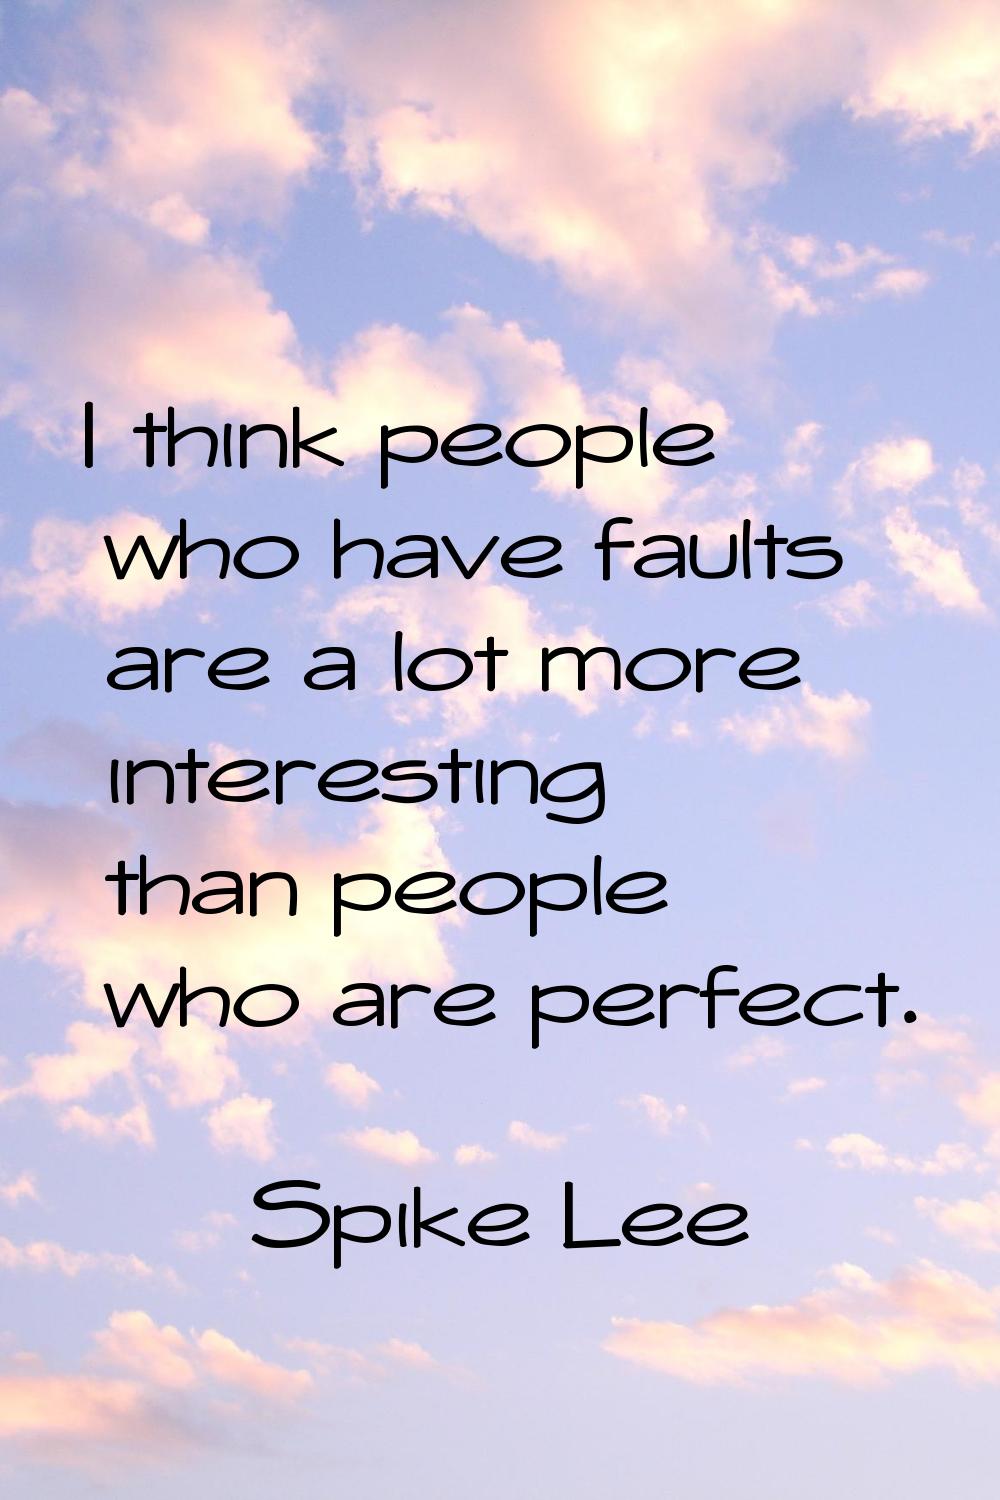 I think people who have faults are a lot more interesting than people who are perfect.